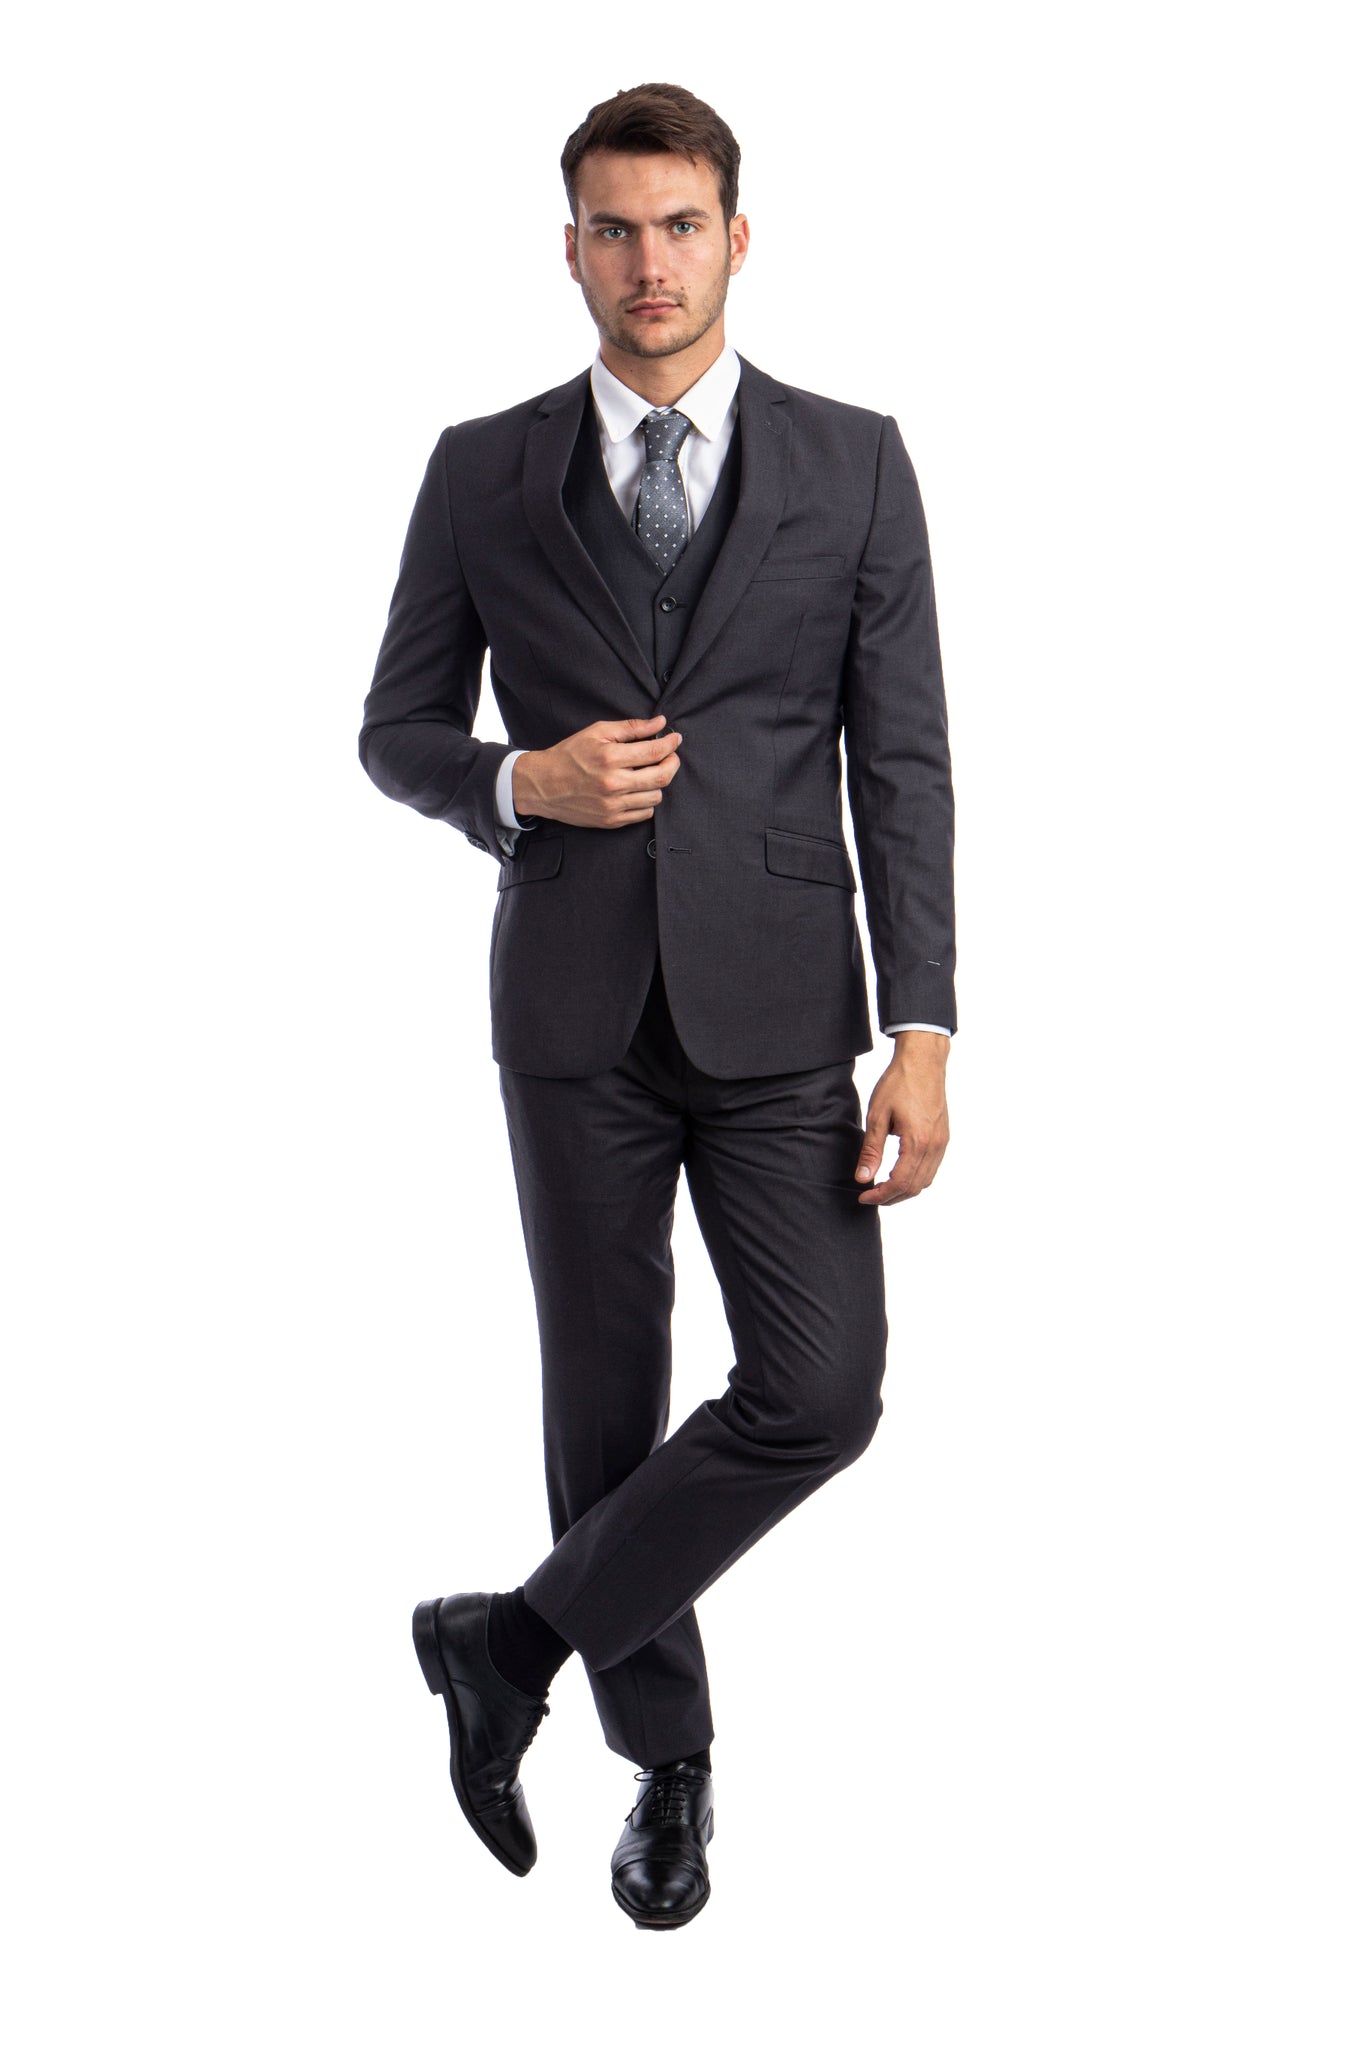 Charcoal Suit For Men Formal Suits For All Ocassions